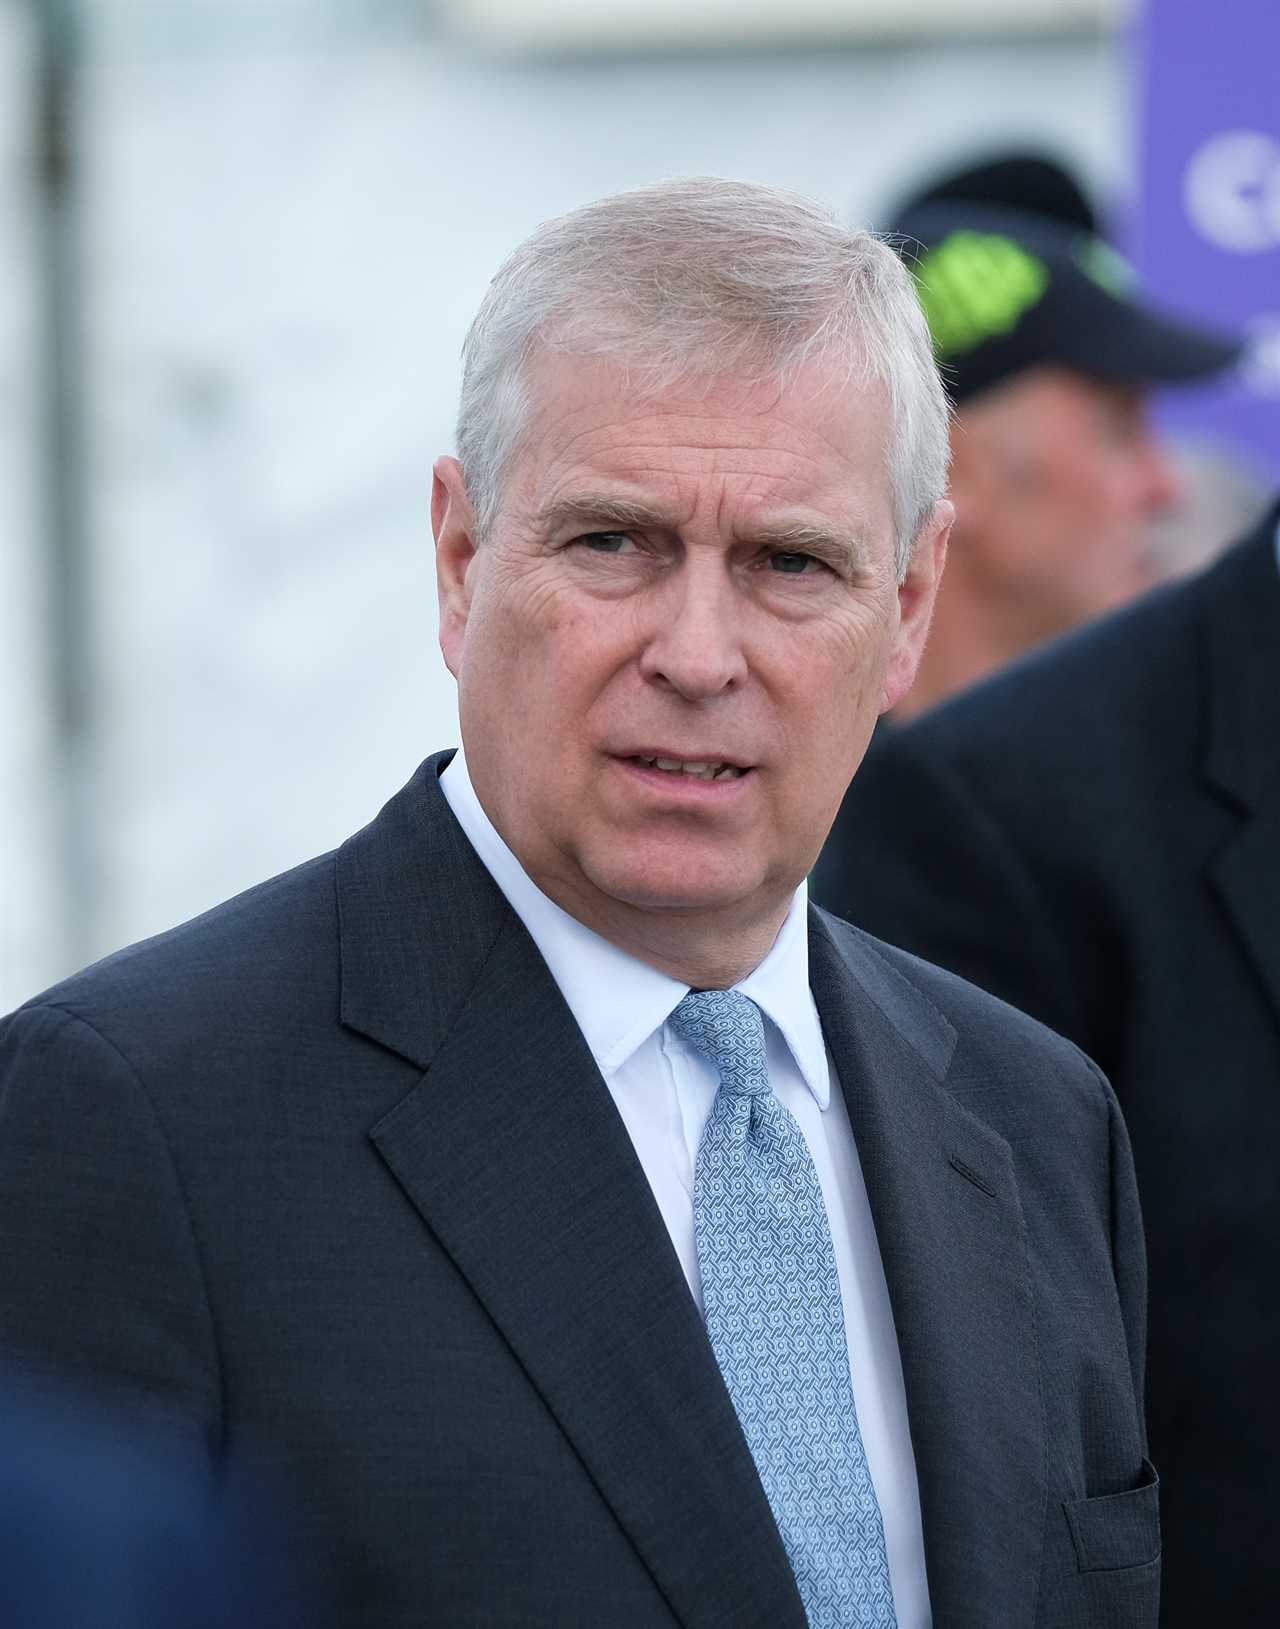 Prince Andrew wanting to reopen his sex abuse case is one of his dimmest moves yet